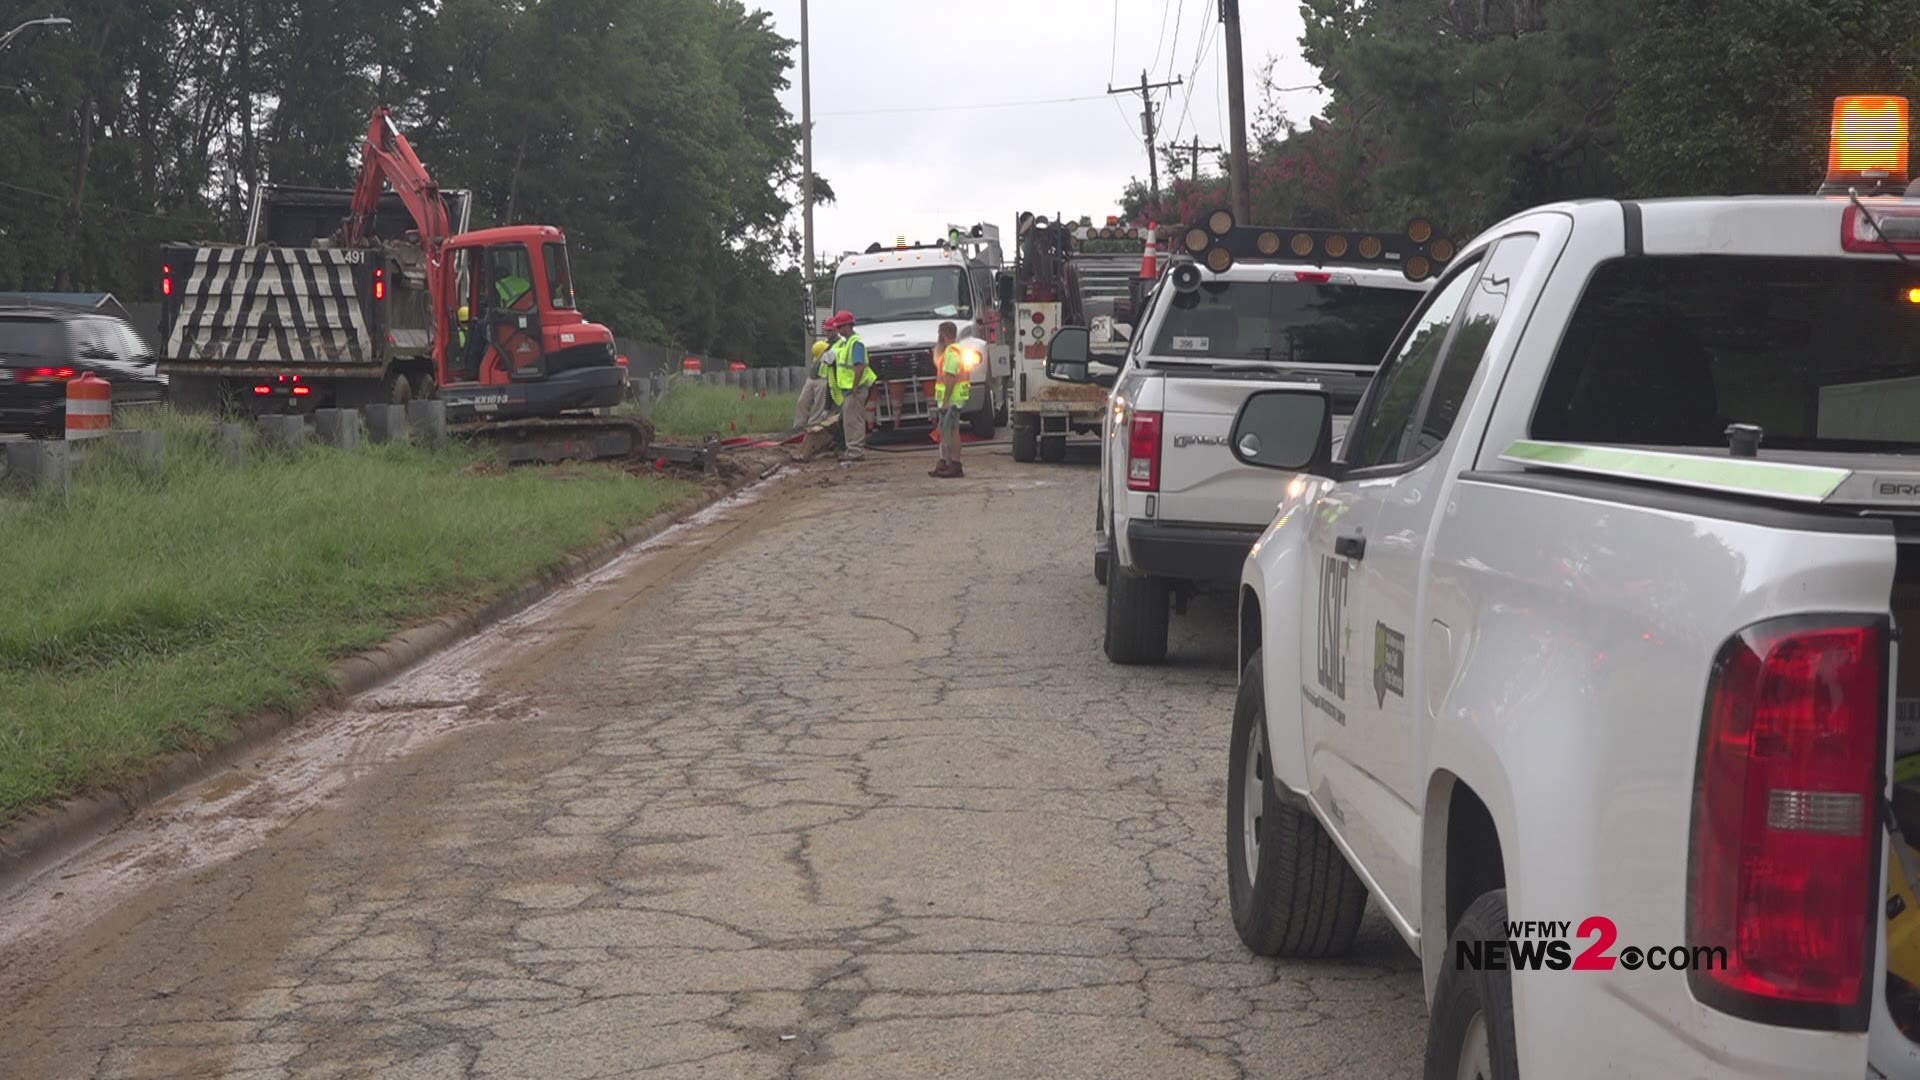 The City of Greensboro says nine customers are without water while the leak is being repaired near Textile Drive.